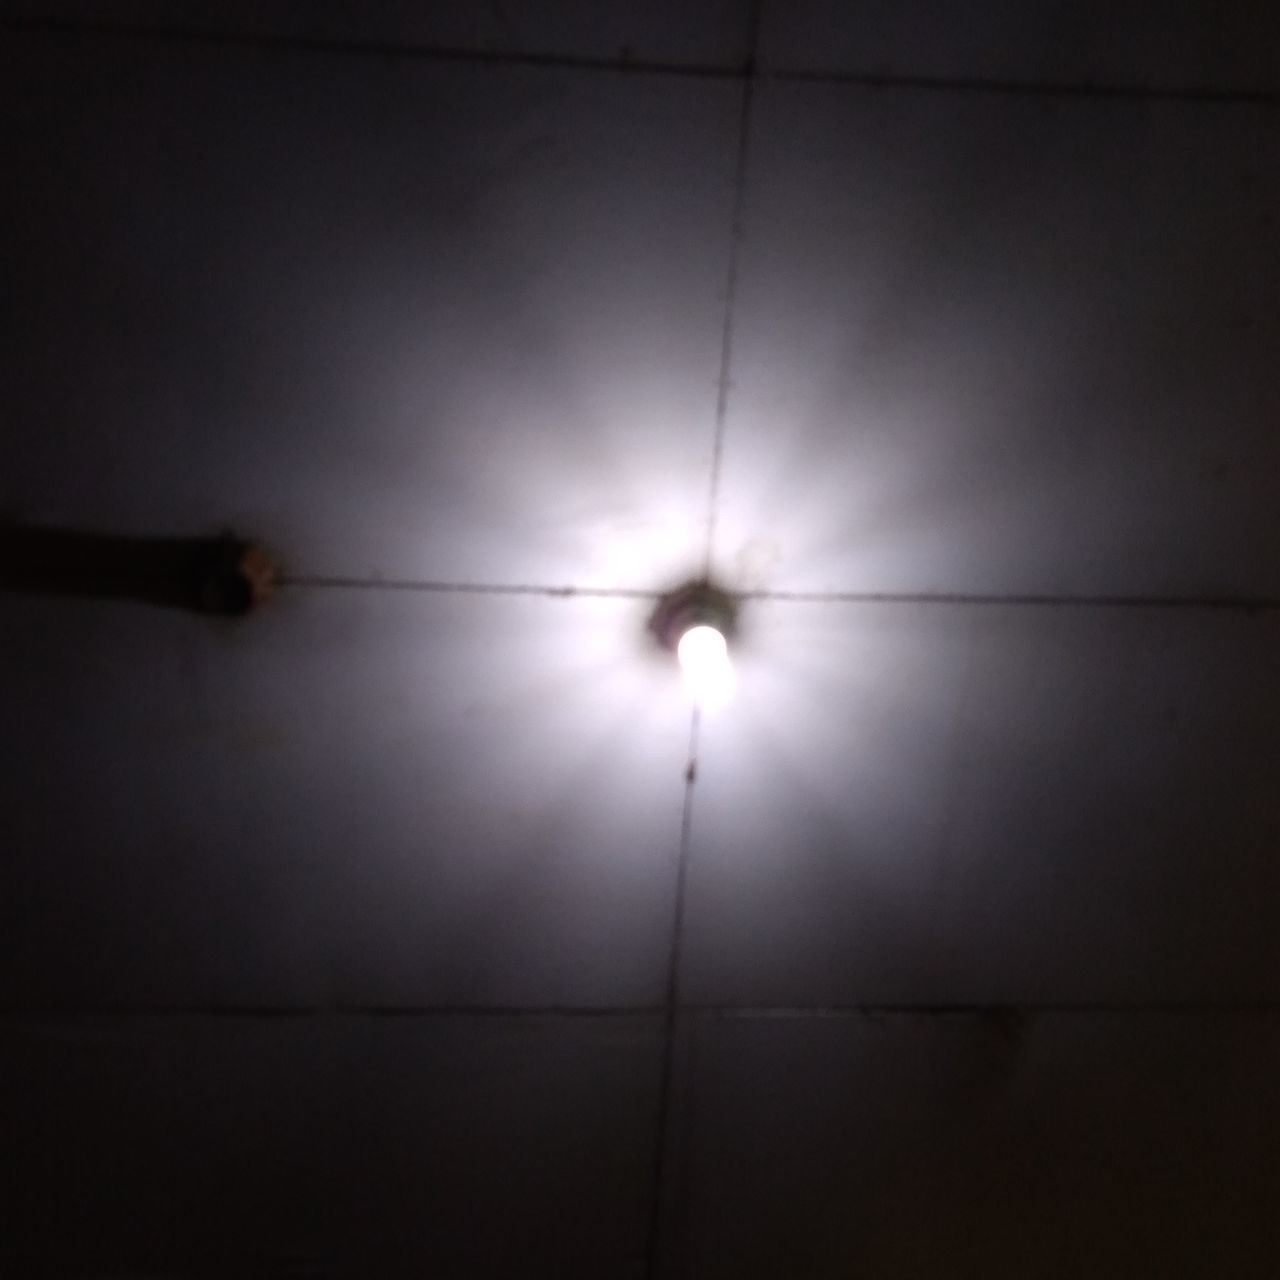 LOW ANGLE VIEW OF ILLUMINATED LIGHT BULBS HANGING ON CEILING